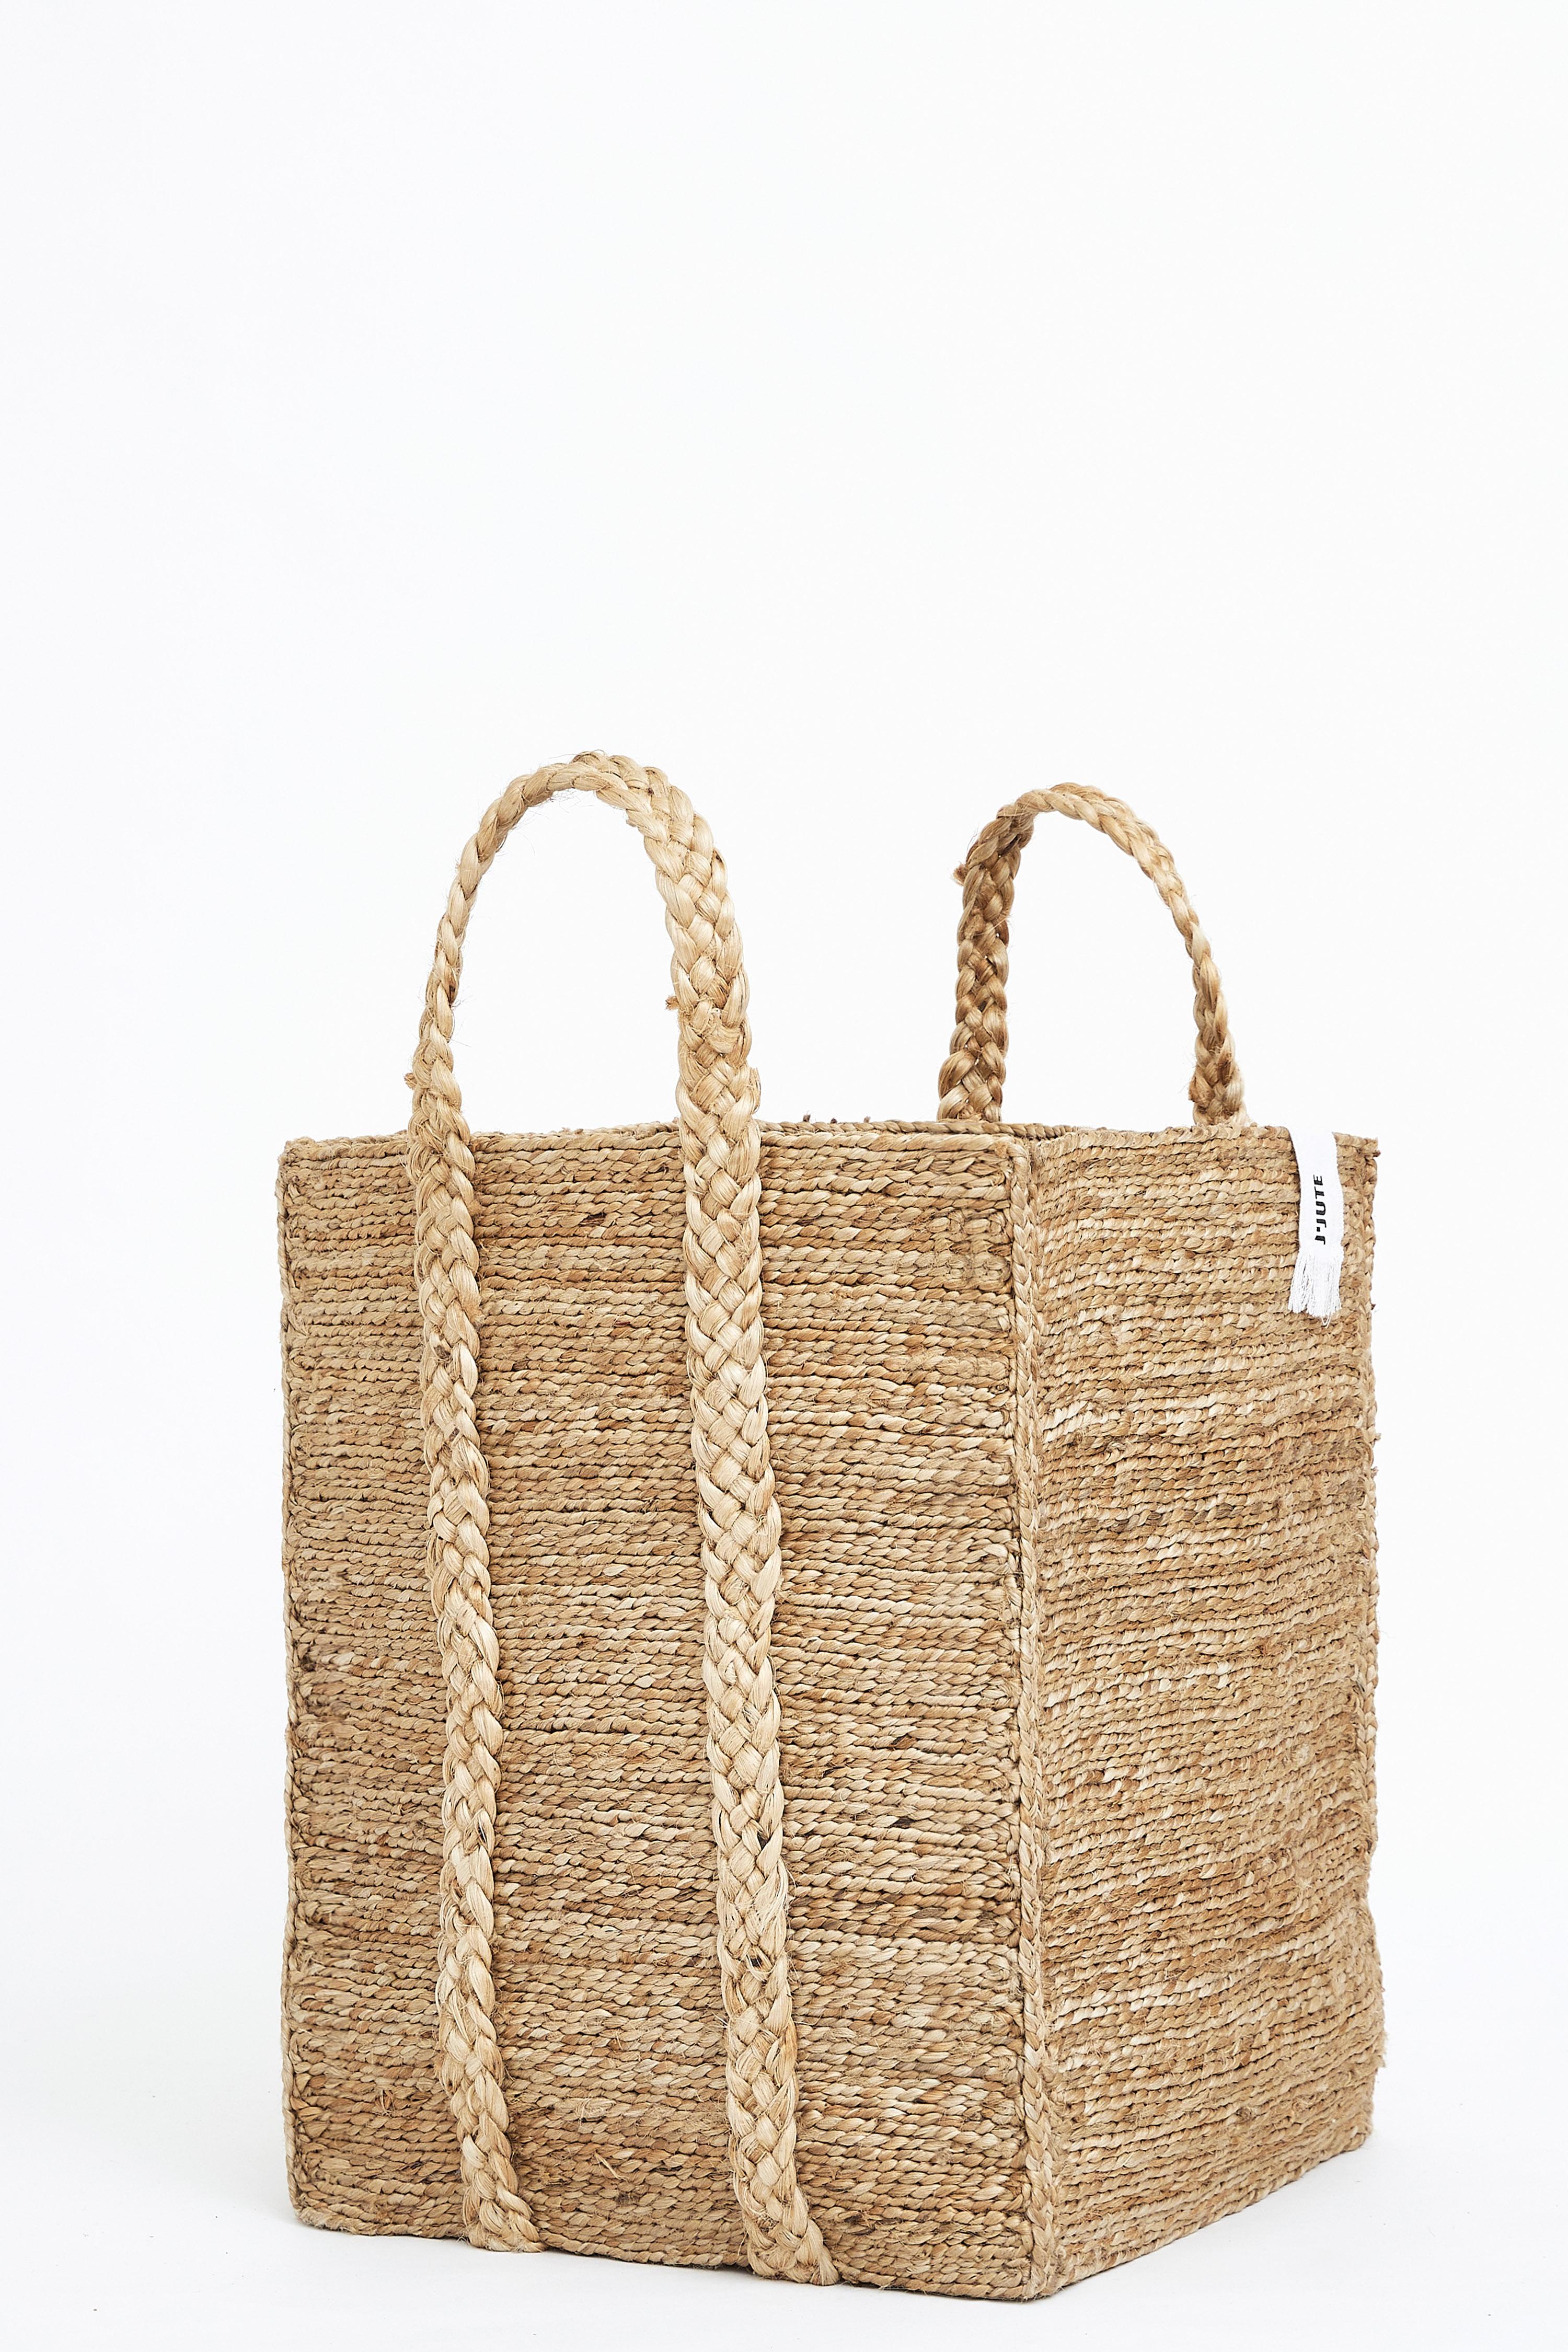 J'Jute is a luxury all-natural, sustainable brand based in Bondi Beach, Australia. Each piece is designed in Australia and handwoven by skilled artisans in India. 

Product Information

Colour: Natural Jute

Material: Natural Jute- a soft durable